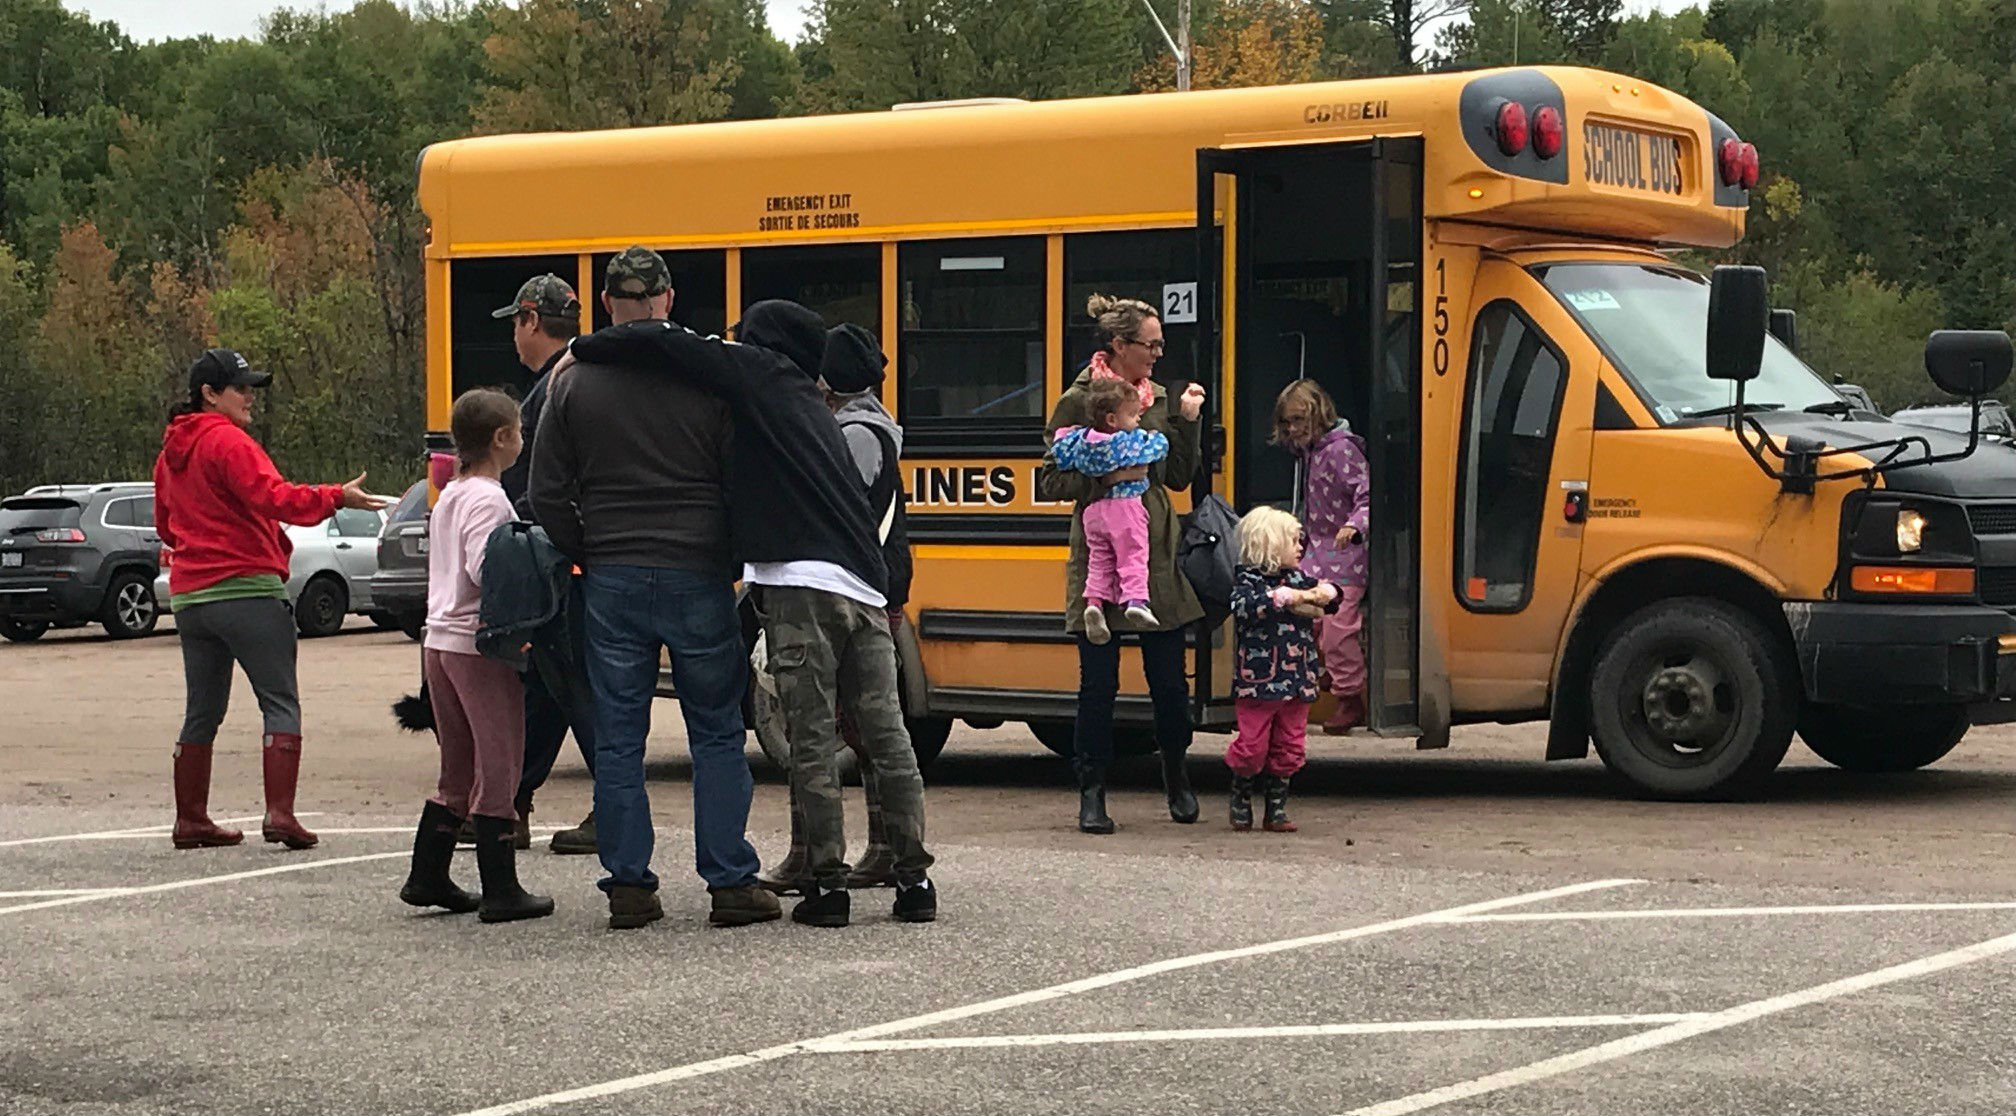 Cranberrry Day participants used the free shuttle bus service leaving from Callander's Community Centre and dropping off at Cranberry Trail.